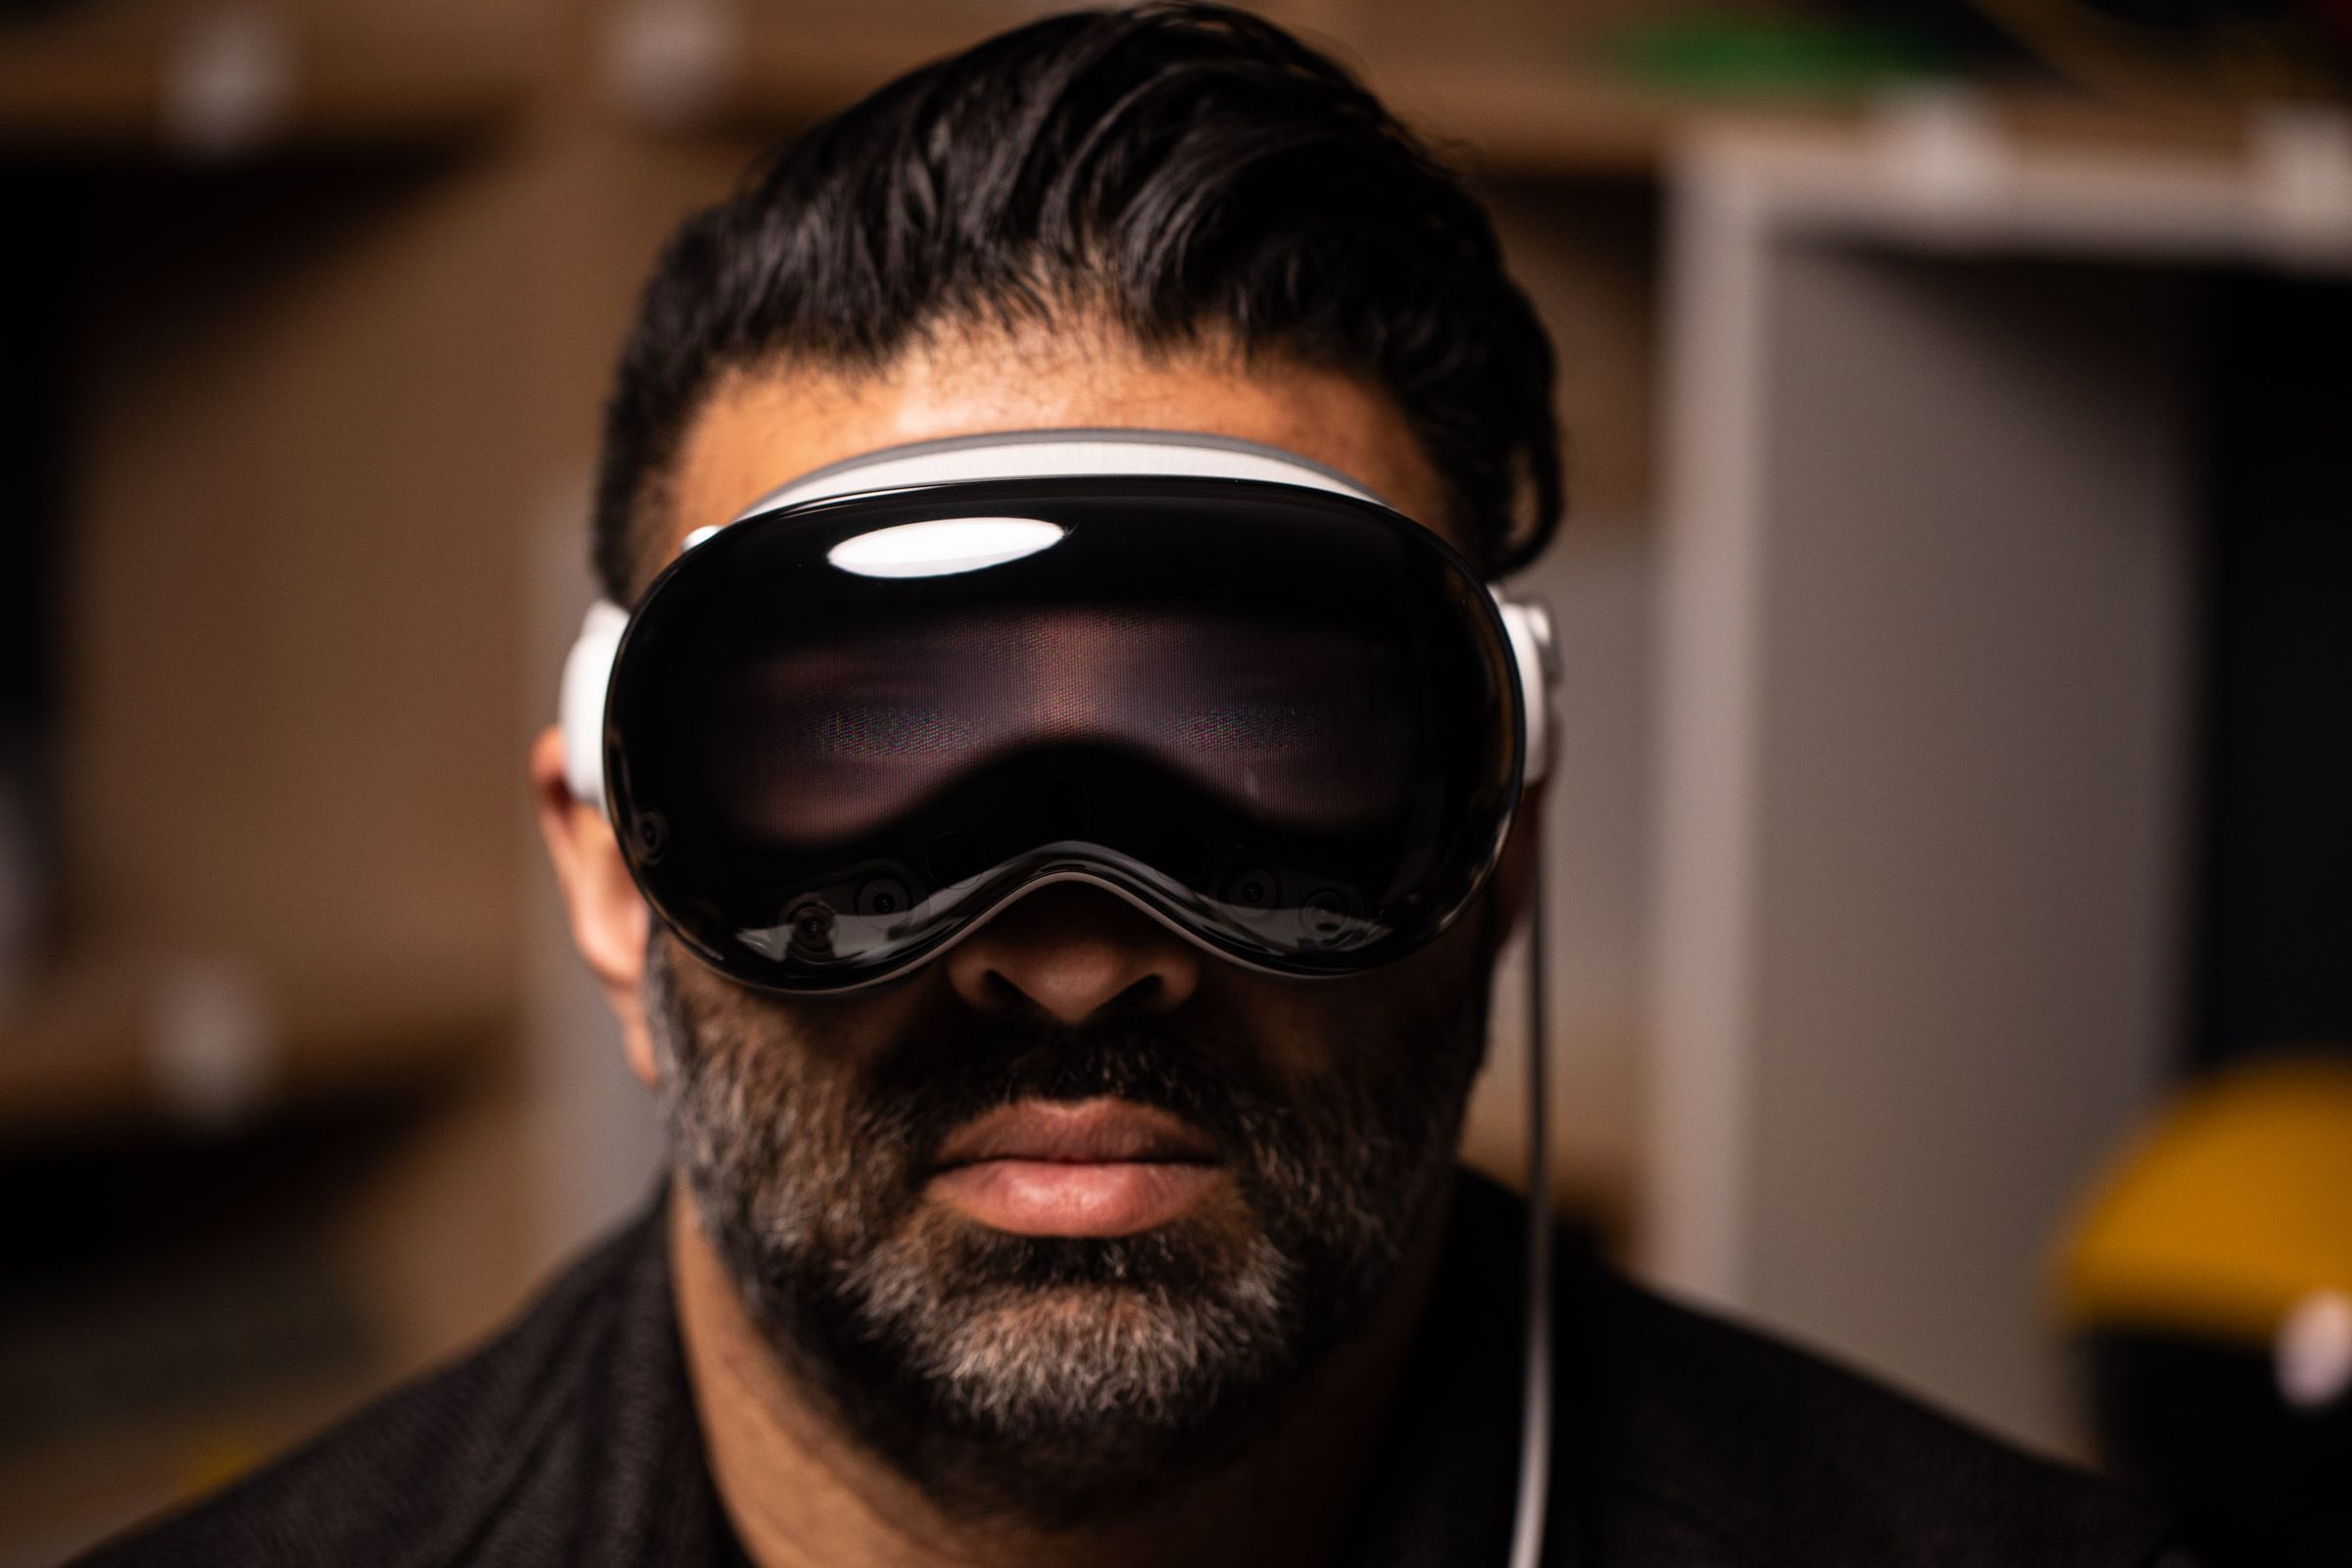 Nilay Patel wears the Vision Pro, with the front display showing a faint image of his eyes.